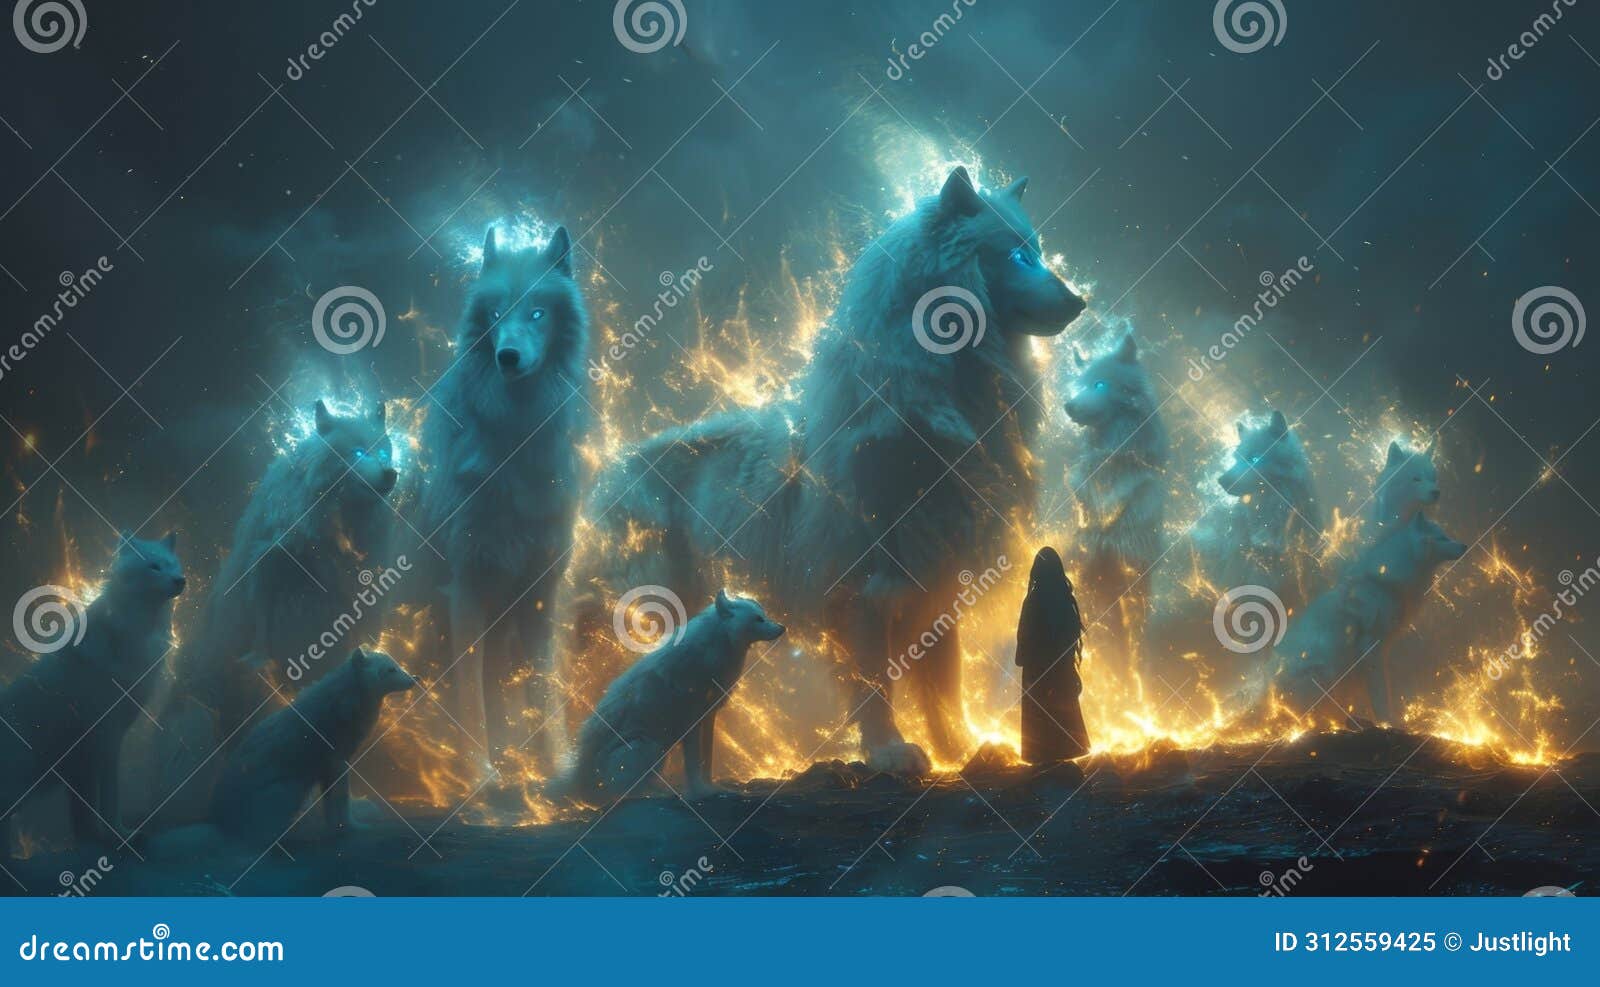 a group of spirit animals each glowing with their own distinctive energy gather around a young soul to impart their